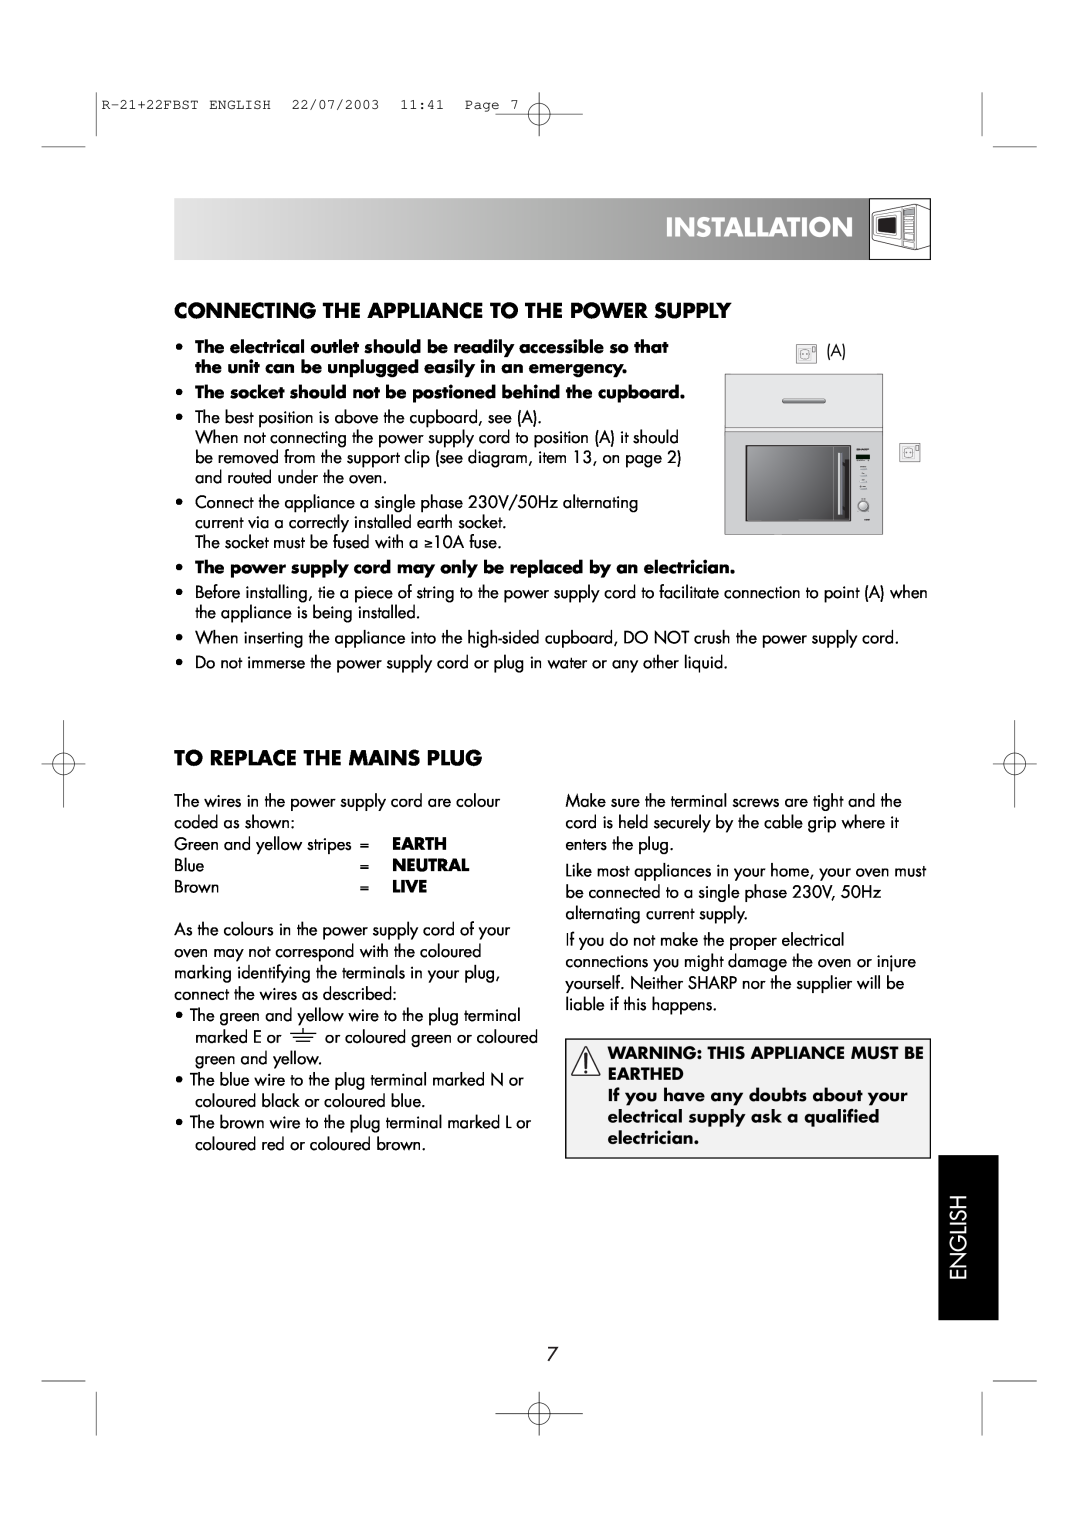 Sharp R-21 FBST, R-22FBST Connecting The Appliance To The Power Supply, To Replace The Mains Plug, Installation, English 